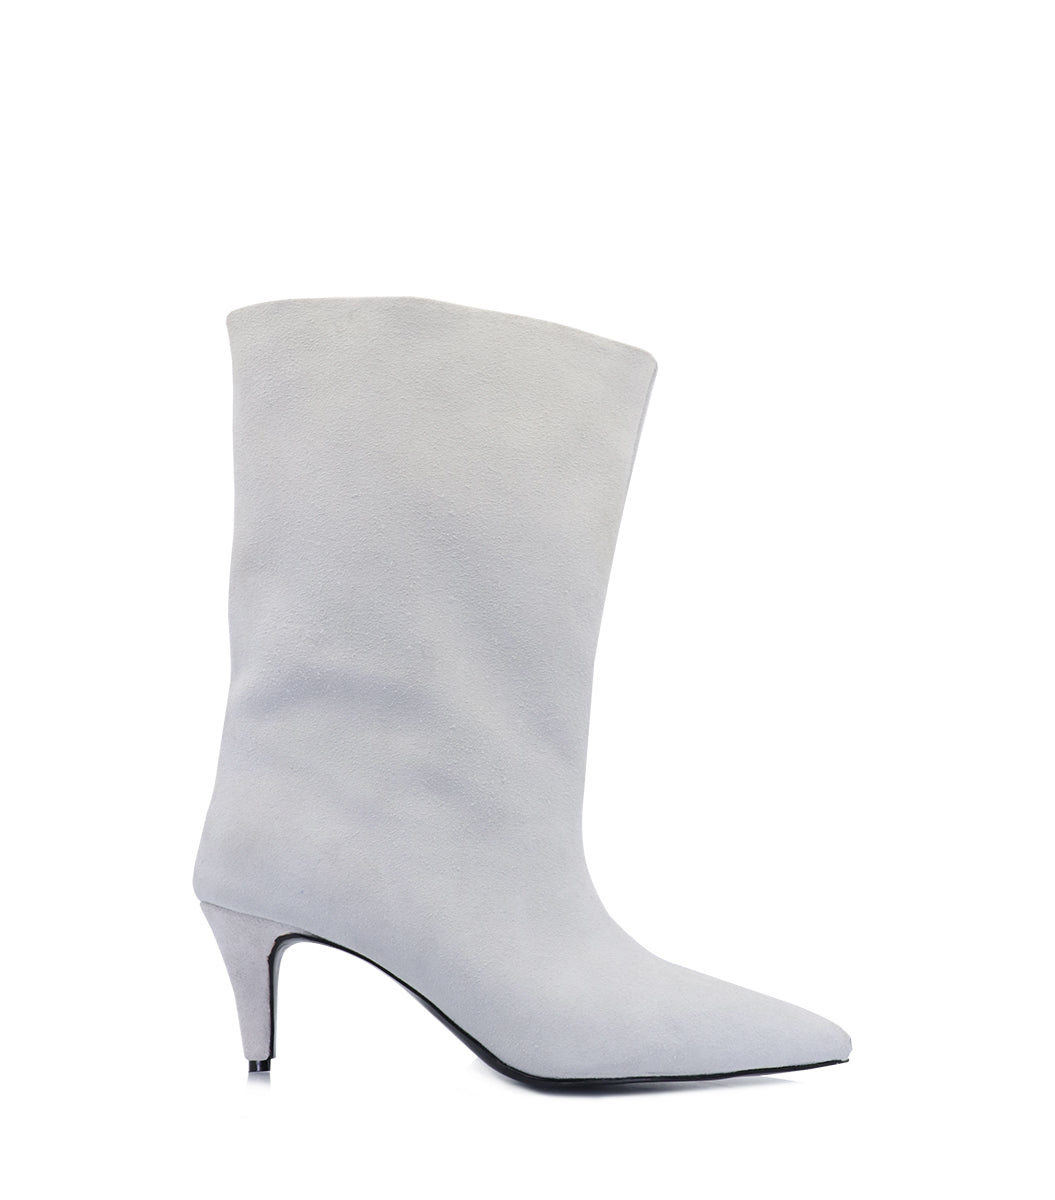 KUHL OFF WHITE BOOTIES